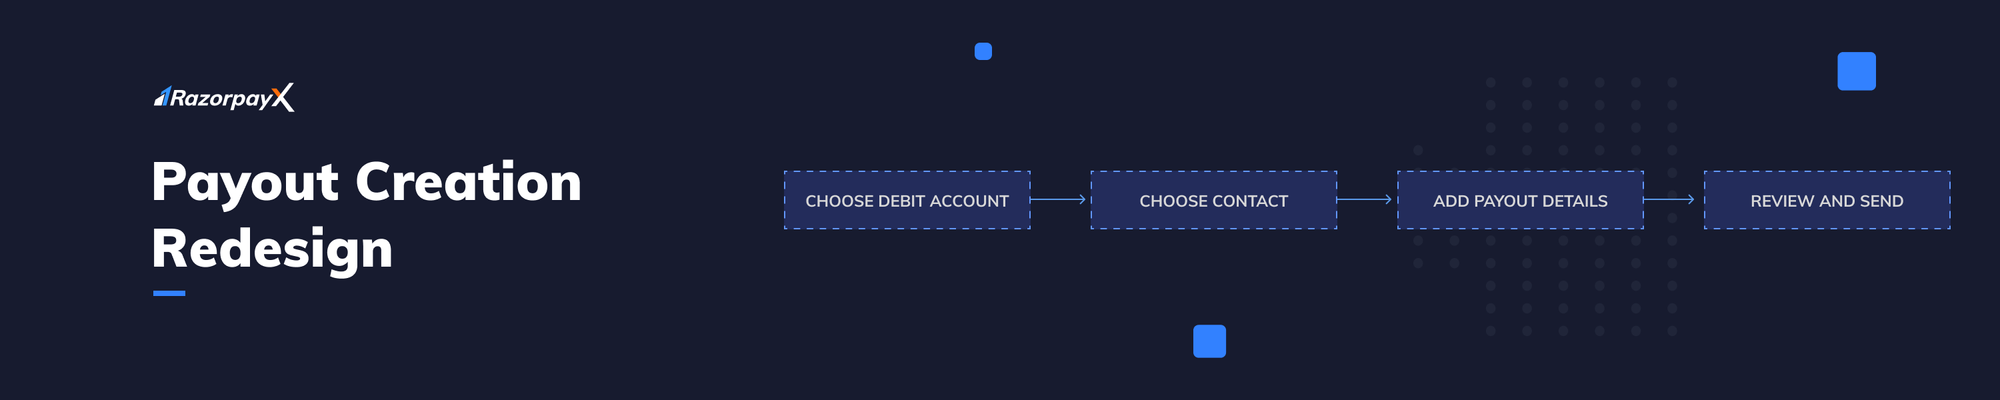 Redesign of the Payout Creation Flow